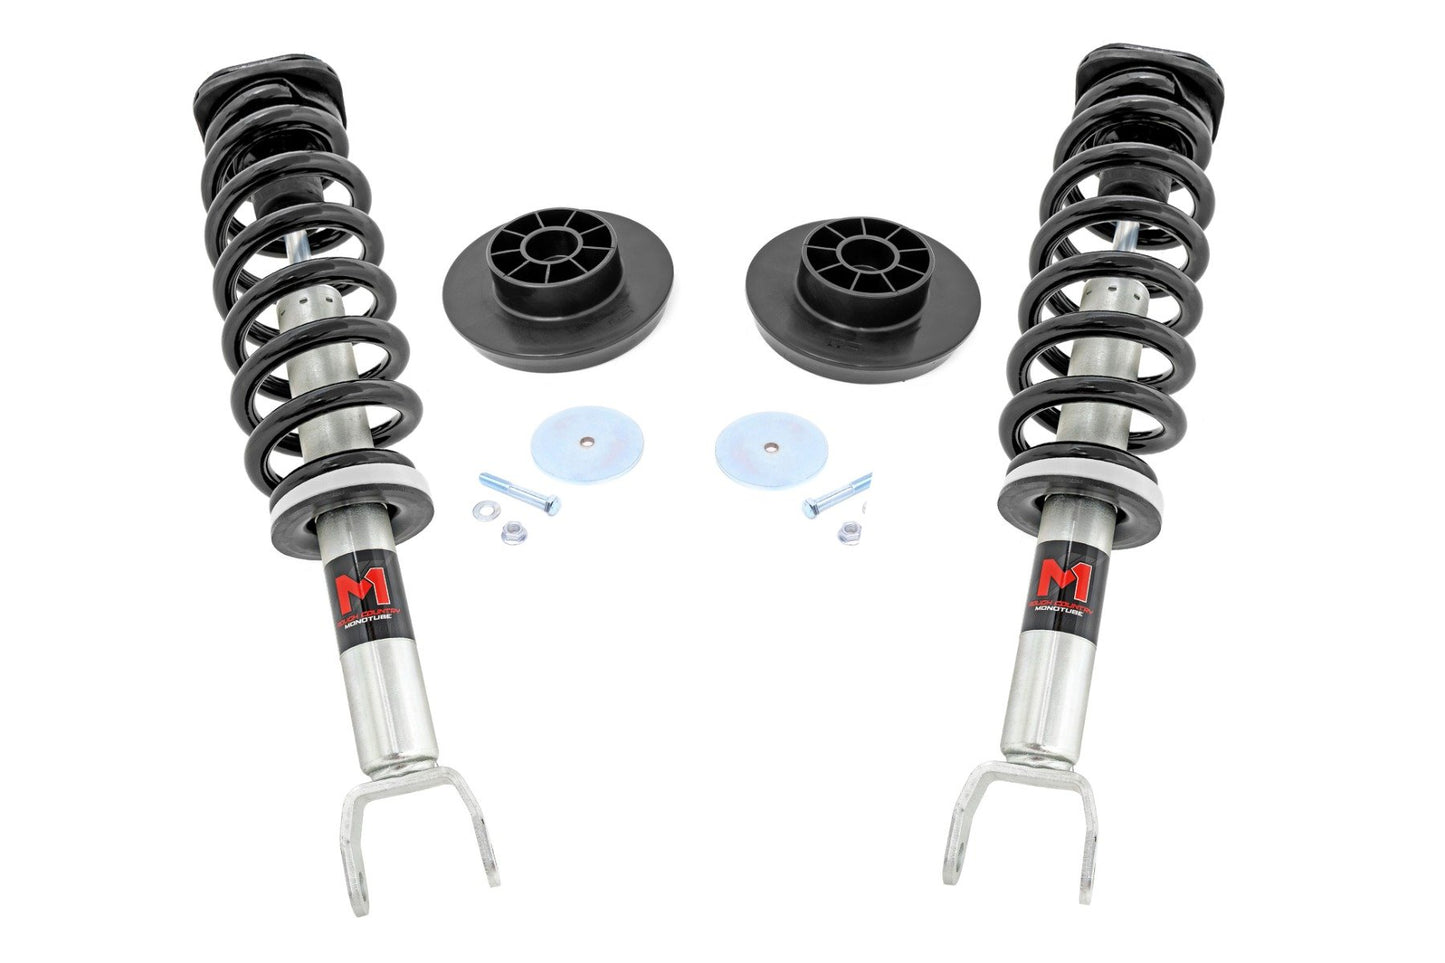 Rough Country 2 Inch Lift Kit |M1 Struts | Ram 1500 4WD (2012-2018 & Classic)